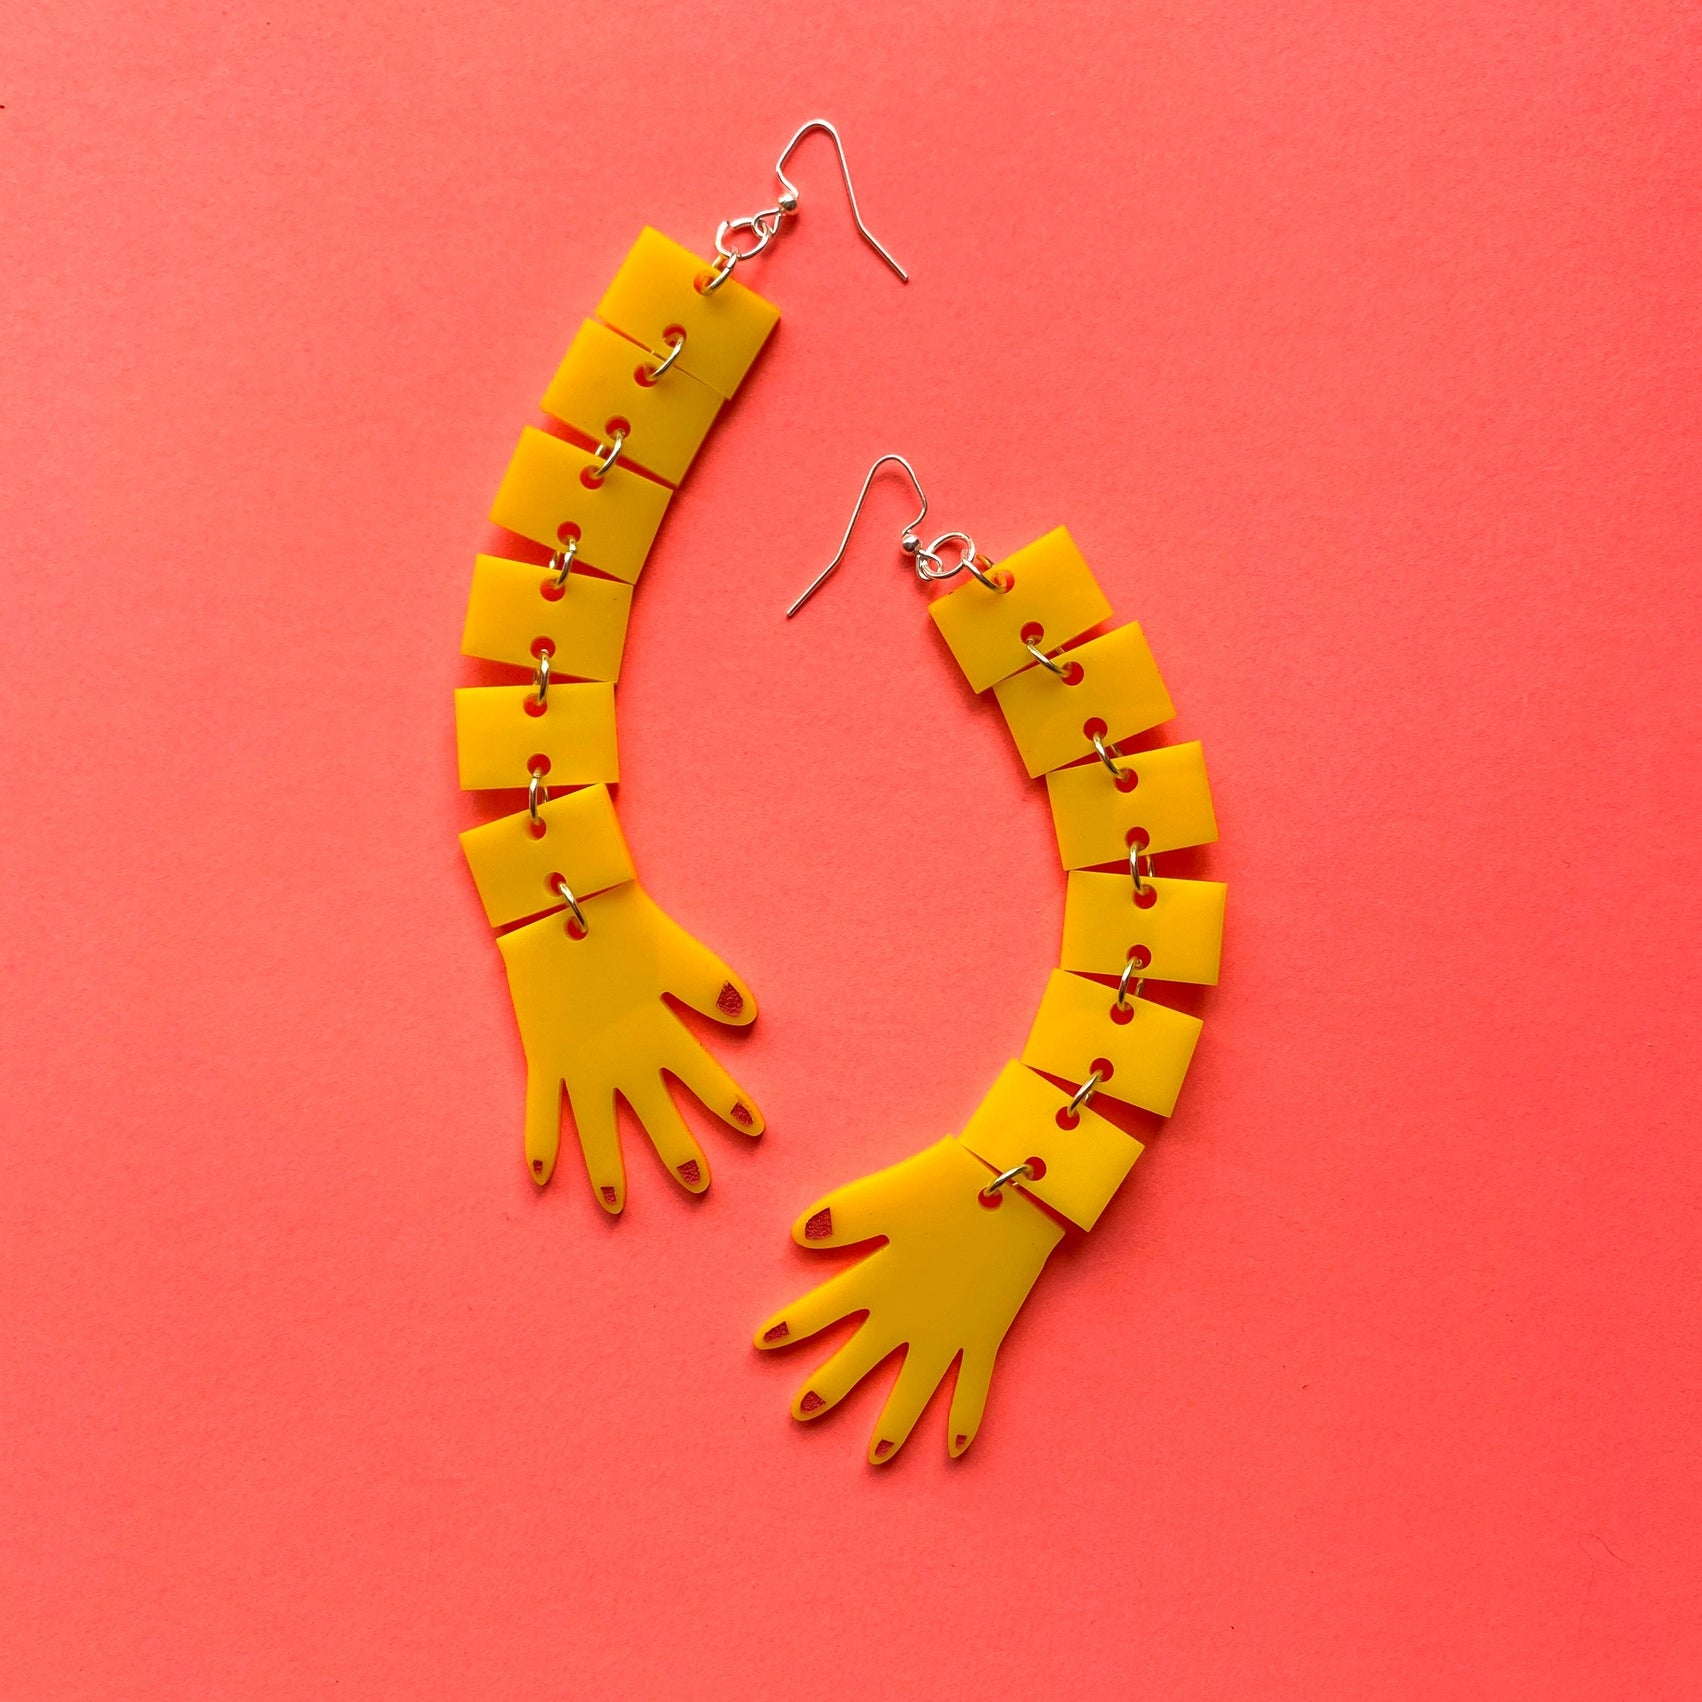 Bright yellow laser-cut acrylic dangle earrings in the shape of two long segmented arms and hands with red fingernails. On a bright pink background 